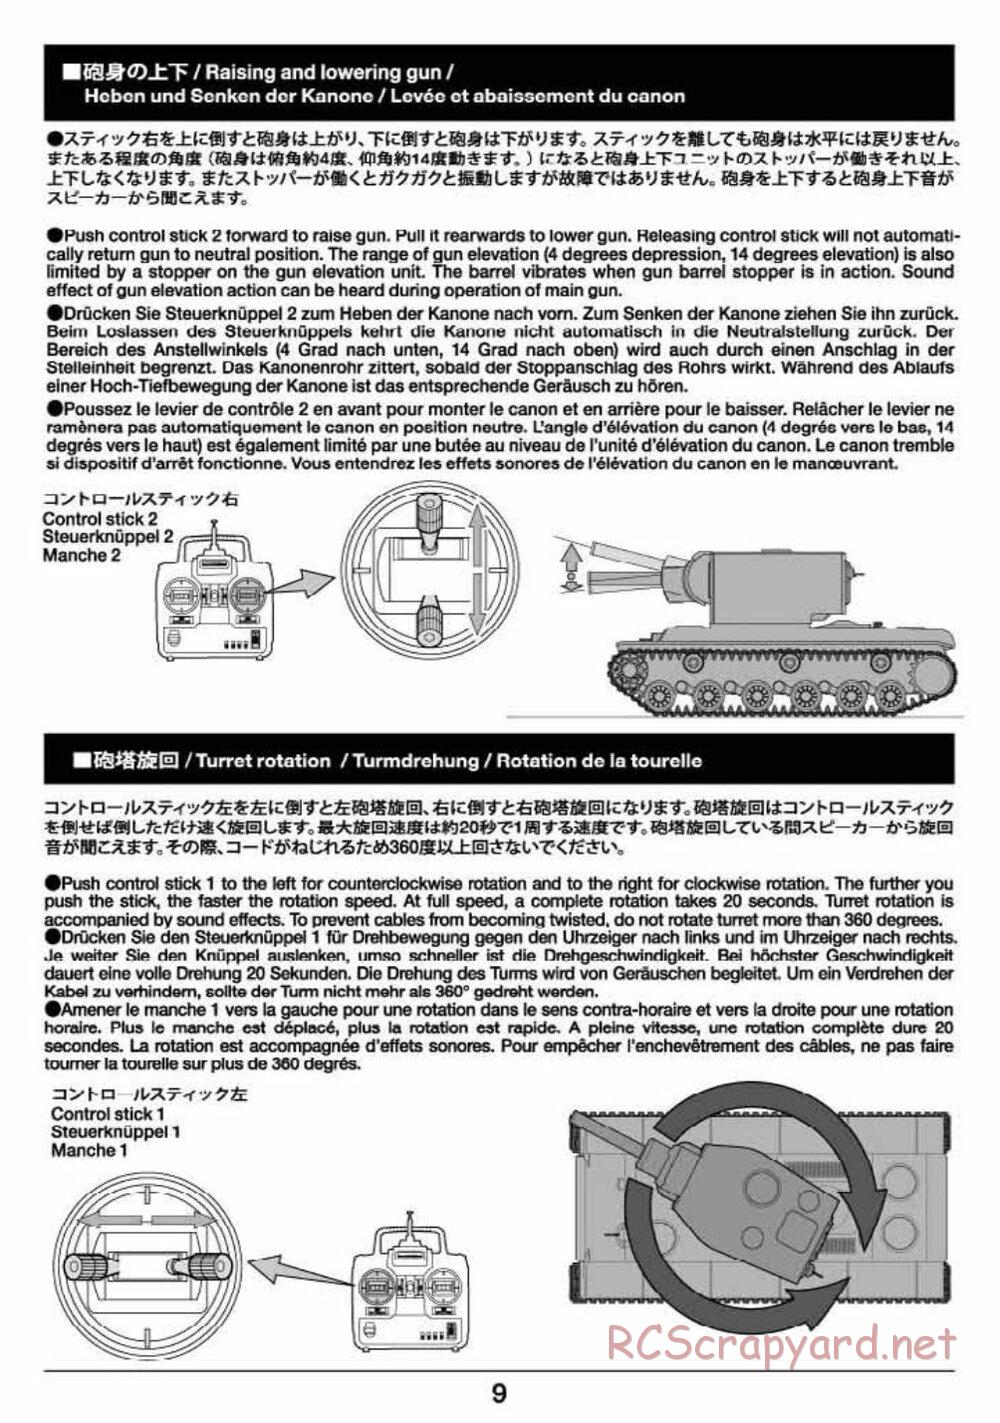 Tamiya - Russian Heavy Tank KV-2 Gigant - 1/16 Scale Chassis - Operation Manual - Page 9